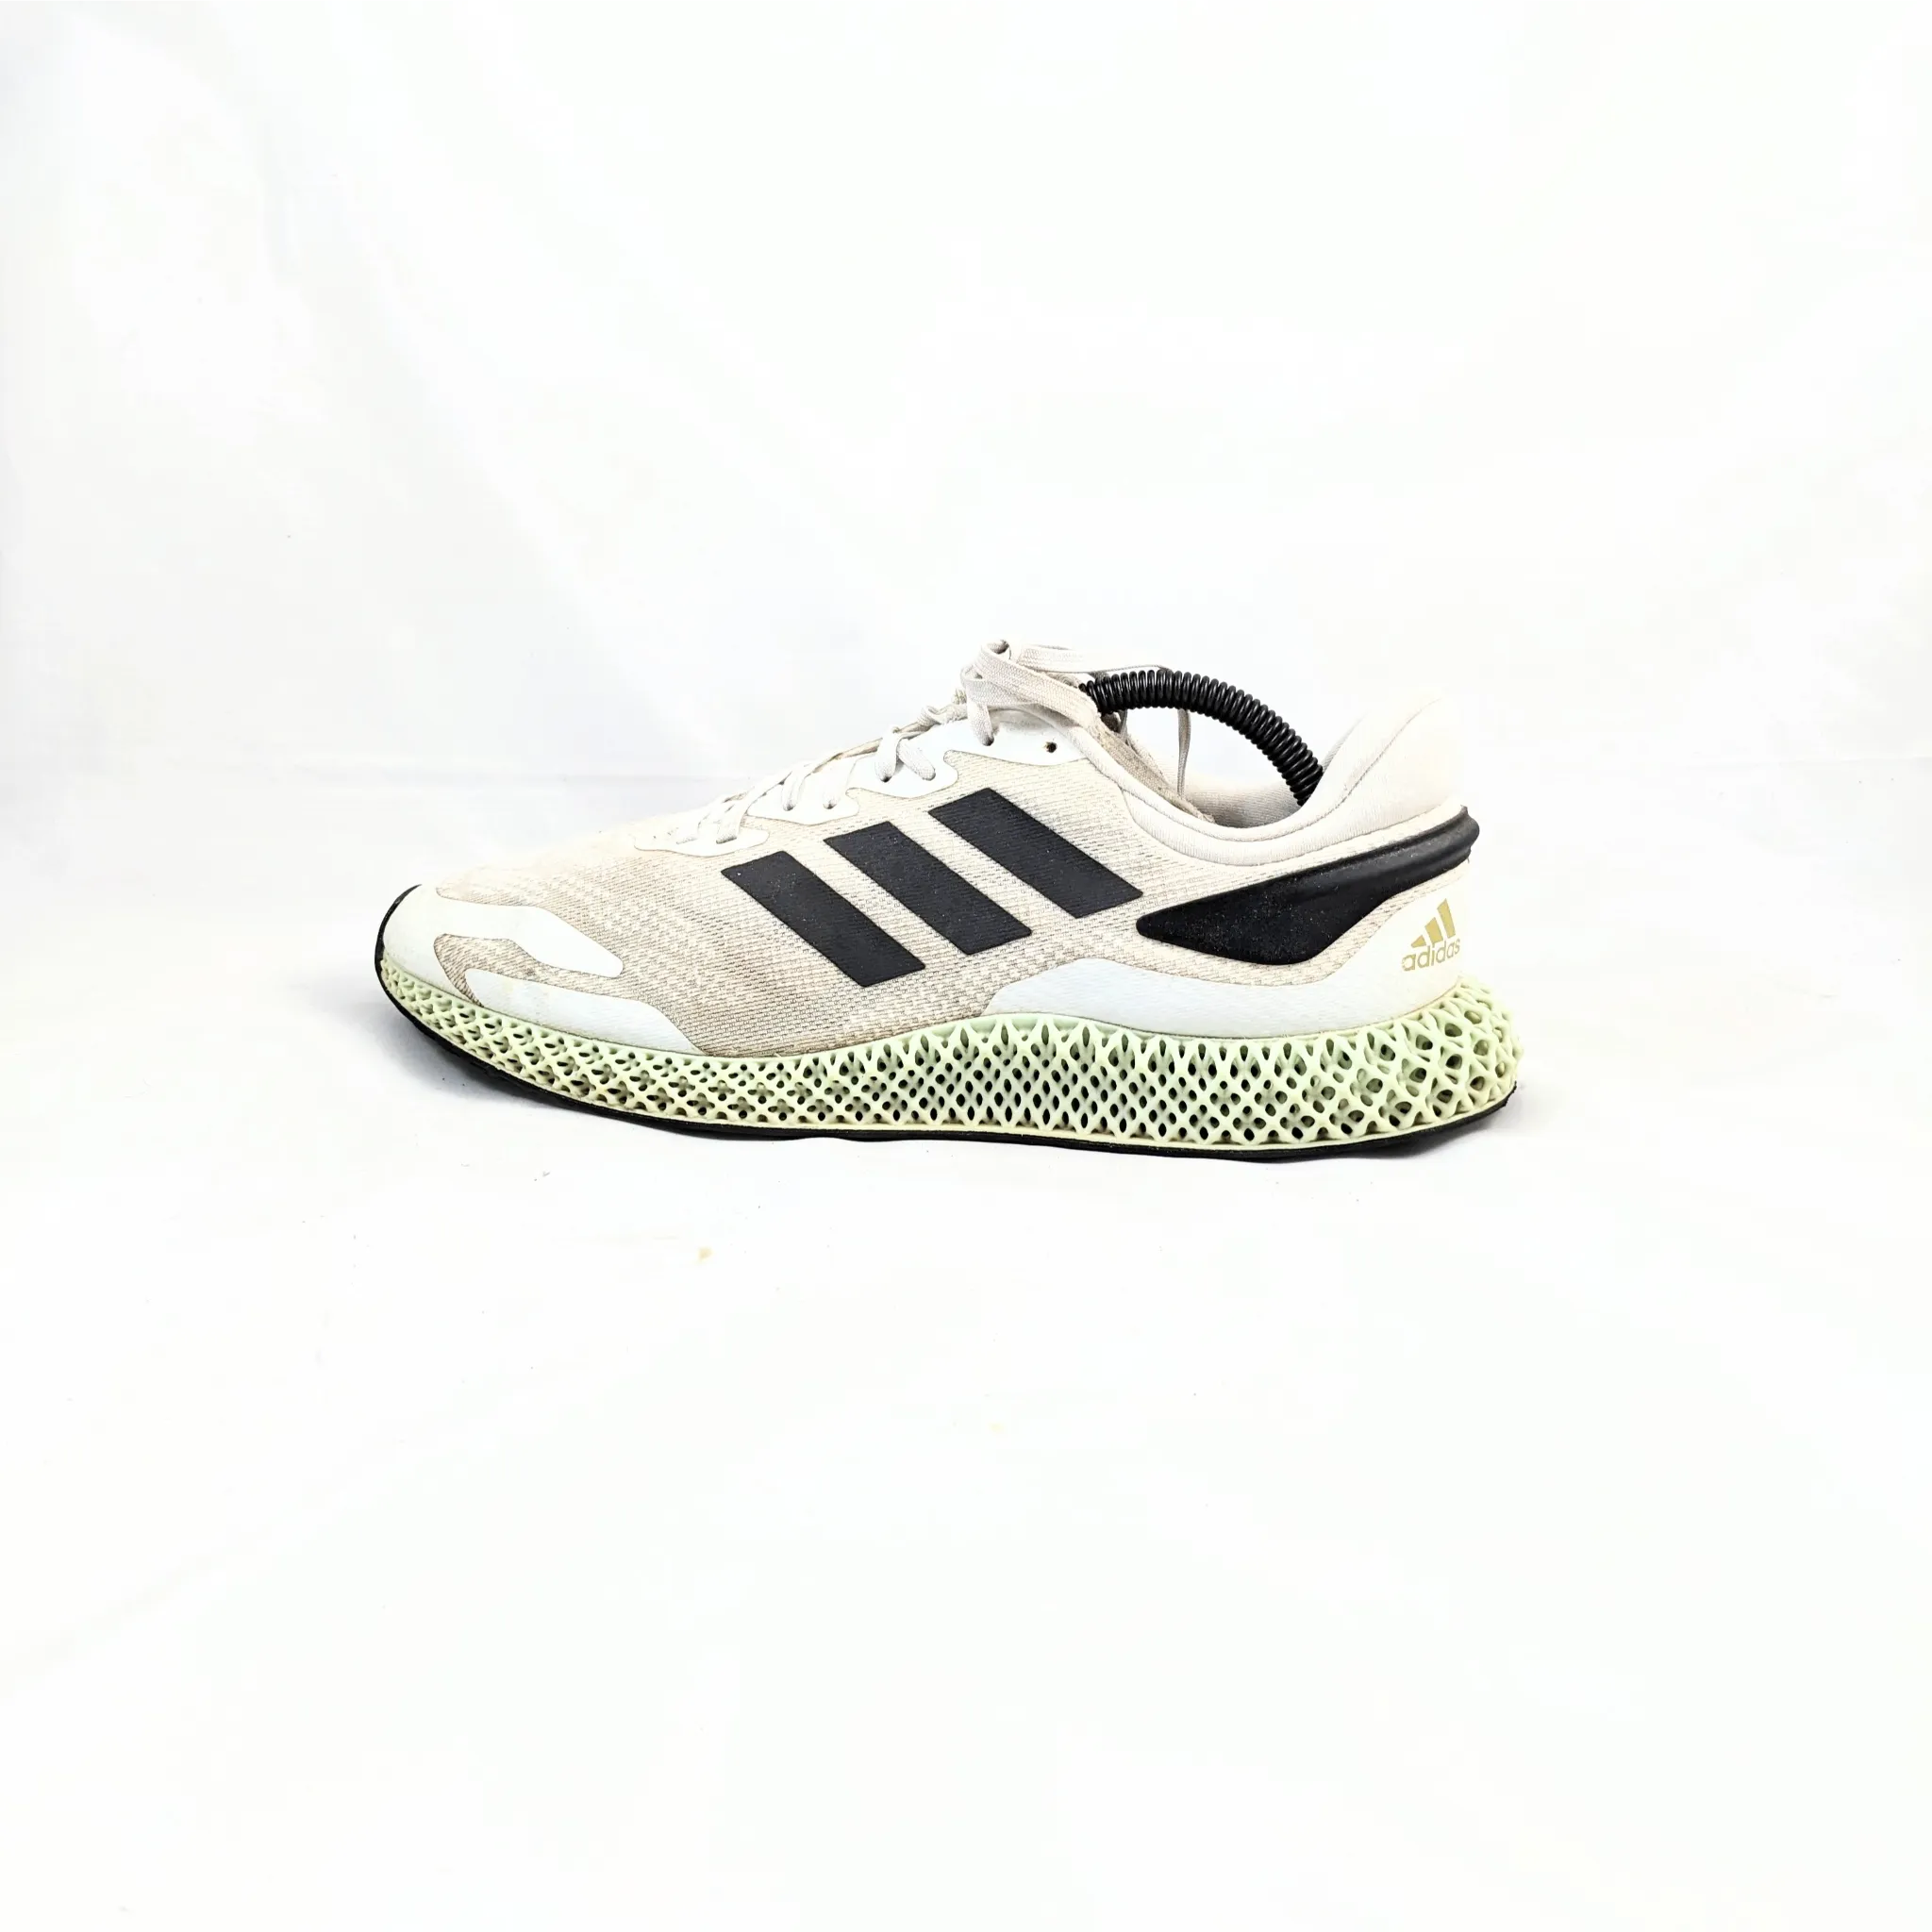 US Adidas 4DFWD Running Shoes